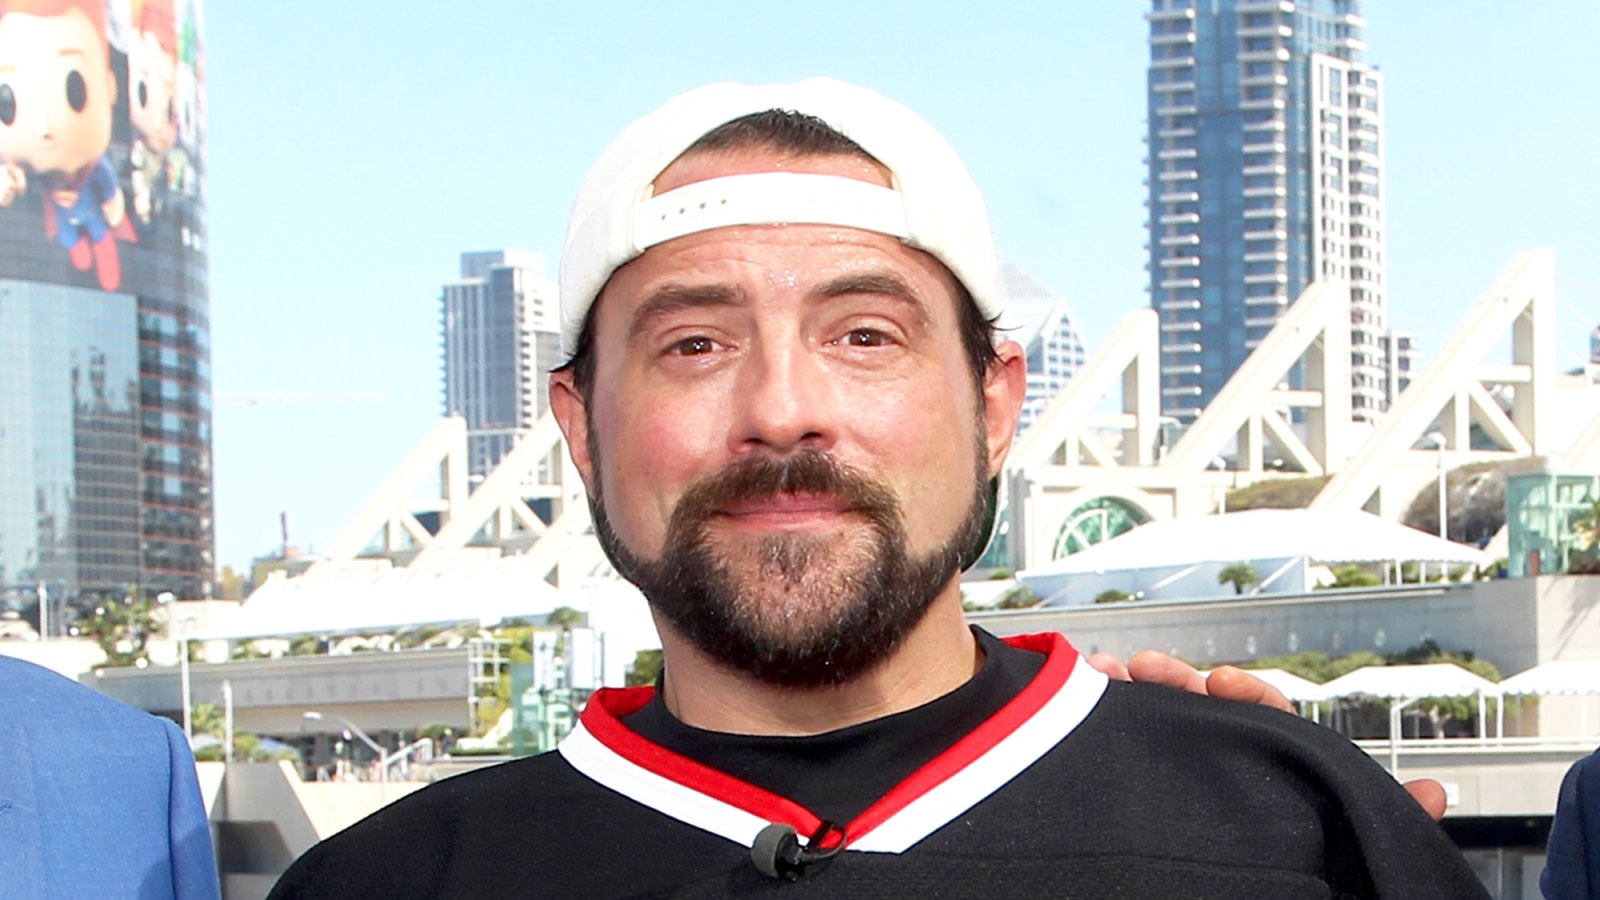 Kevin Smith attends the IMDb Yacht at San Diego Comic-Con 2016 in San Diego, California.